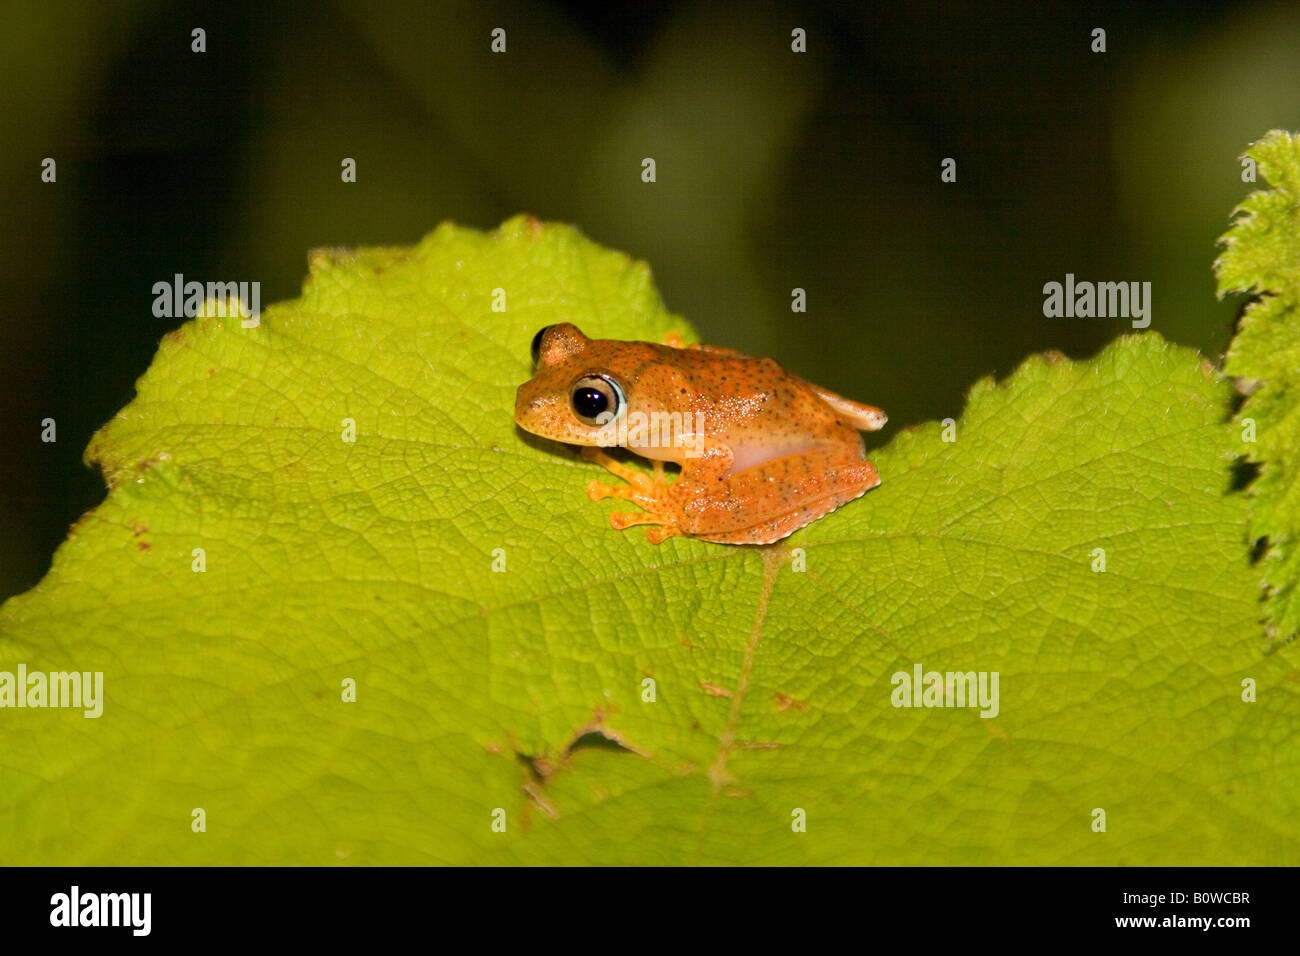 Malagasy or Bright-eyed Frog (Boophis), Madagascar, Africa Stock Photo